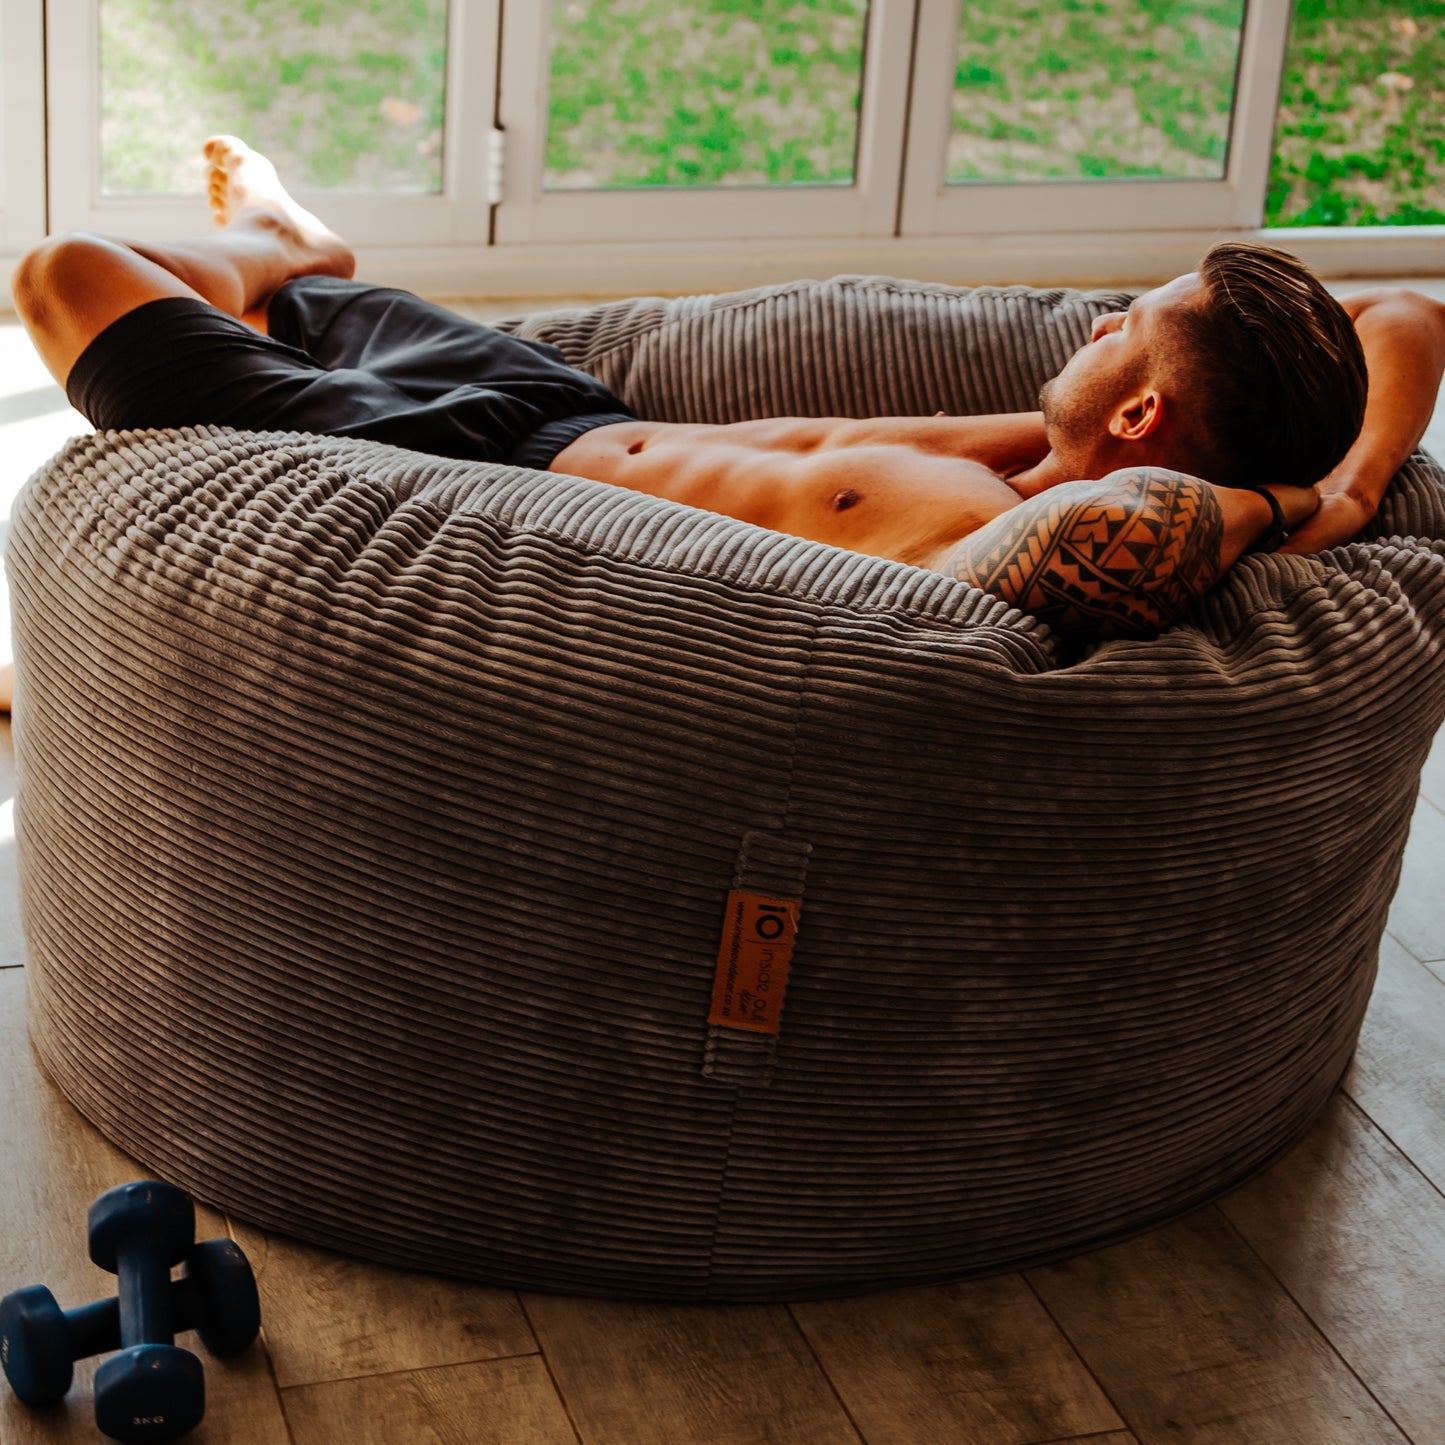 Ginormous Beanbags